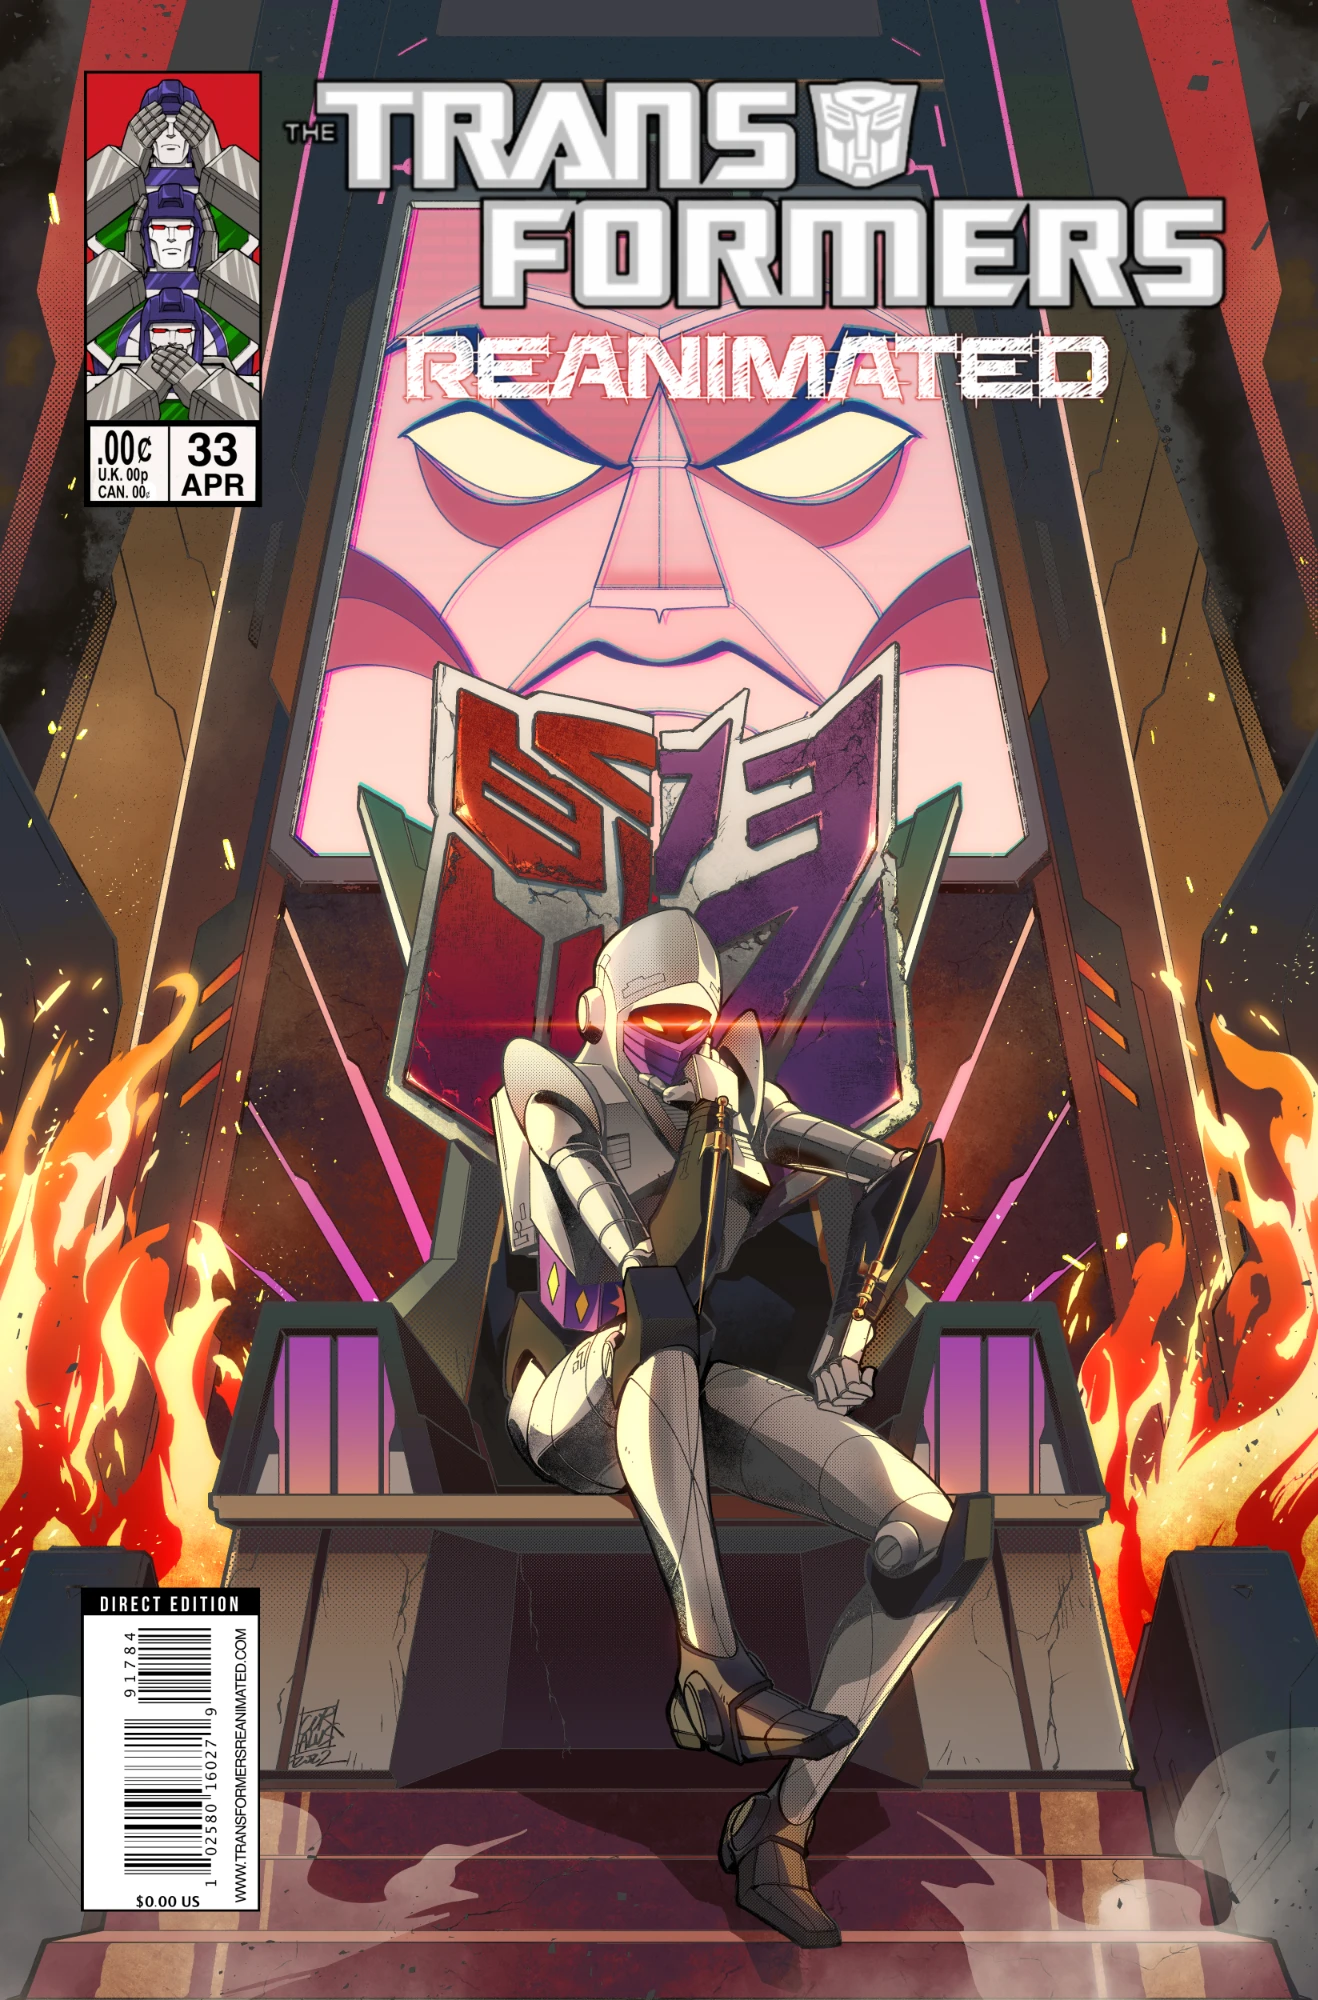 Transformers comic cover with Nightbird sitting on a thrown around flames